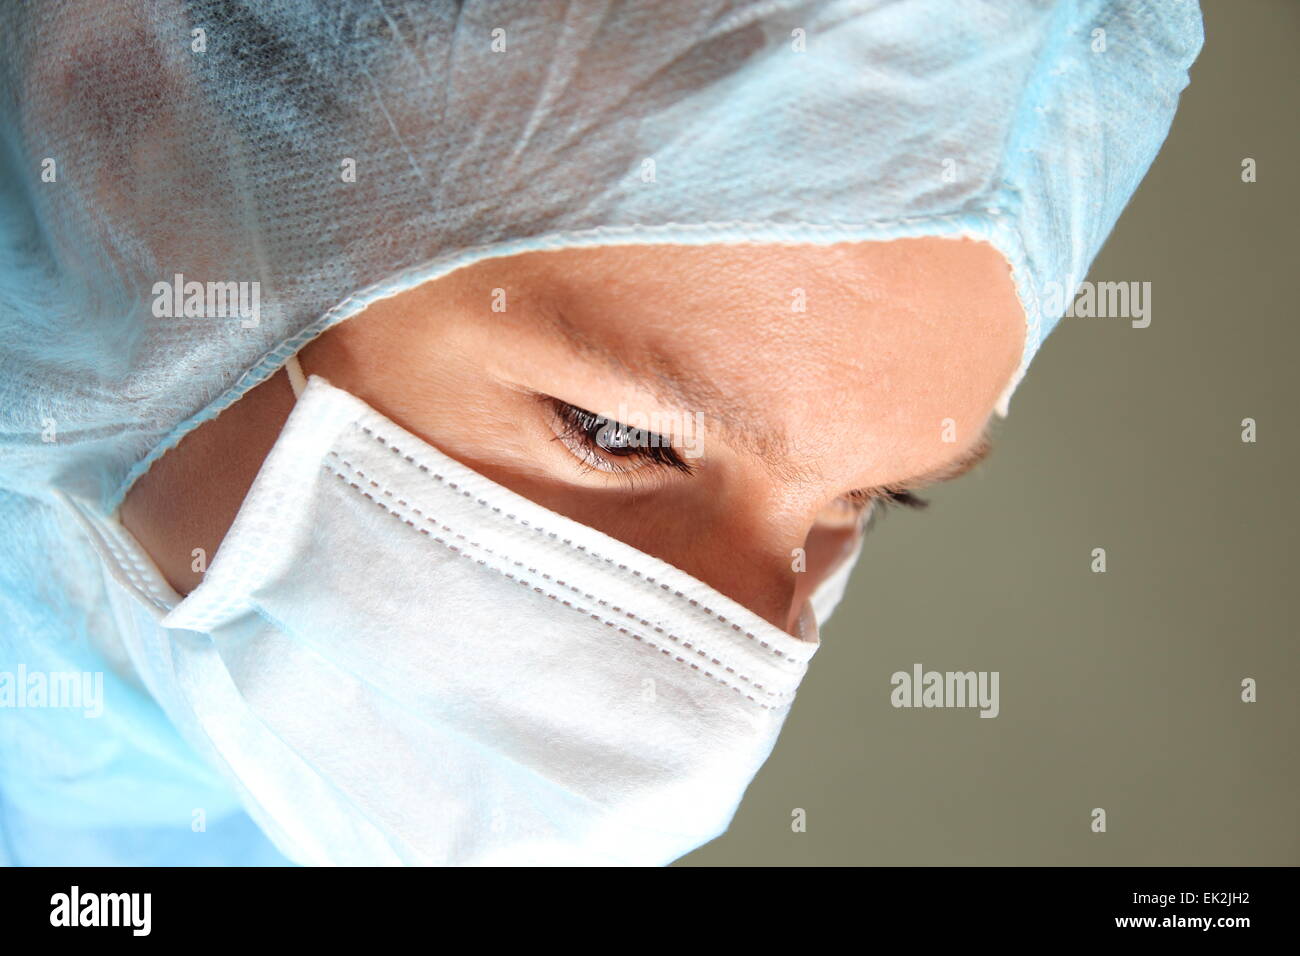 A Woman with cap and coat pharma o doctor in a hospital Stock Photo